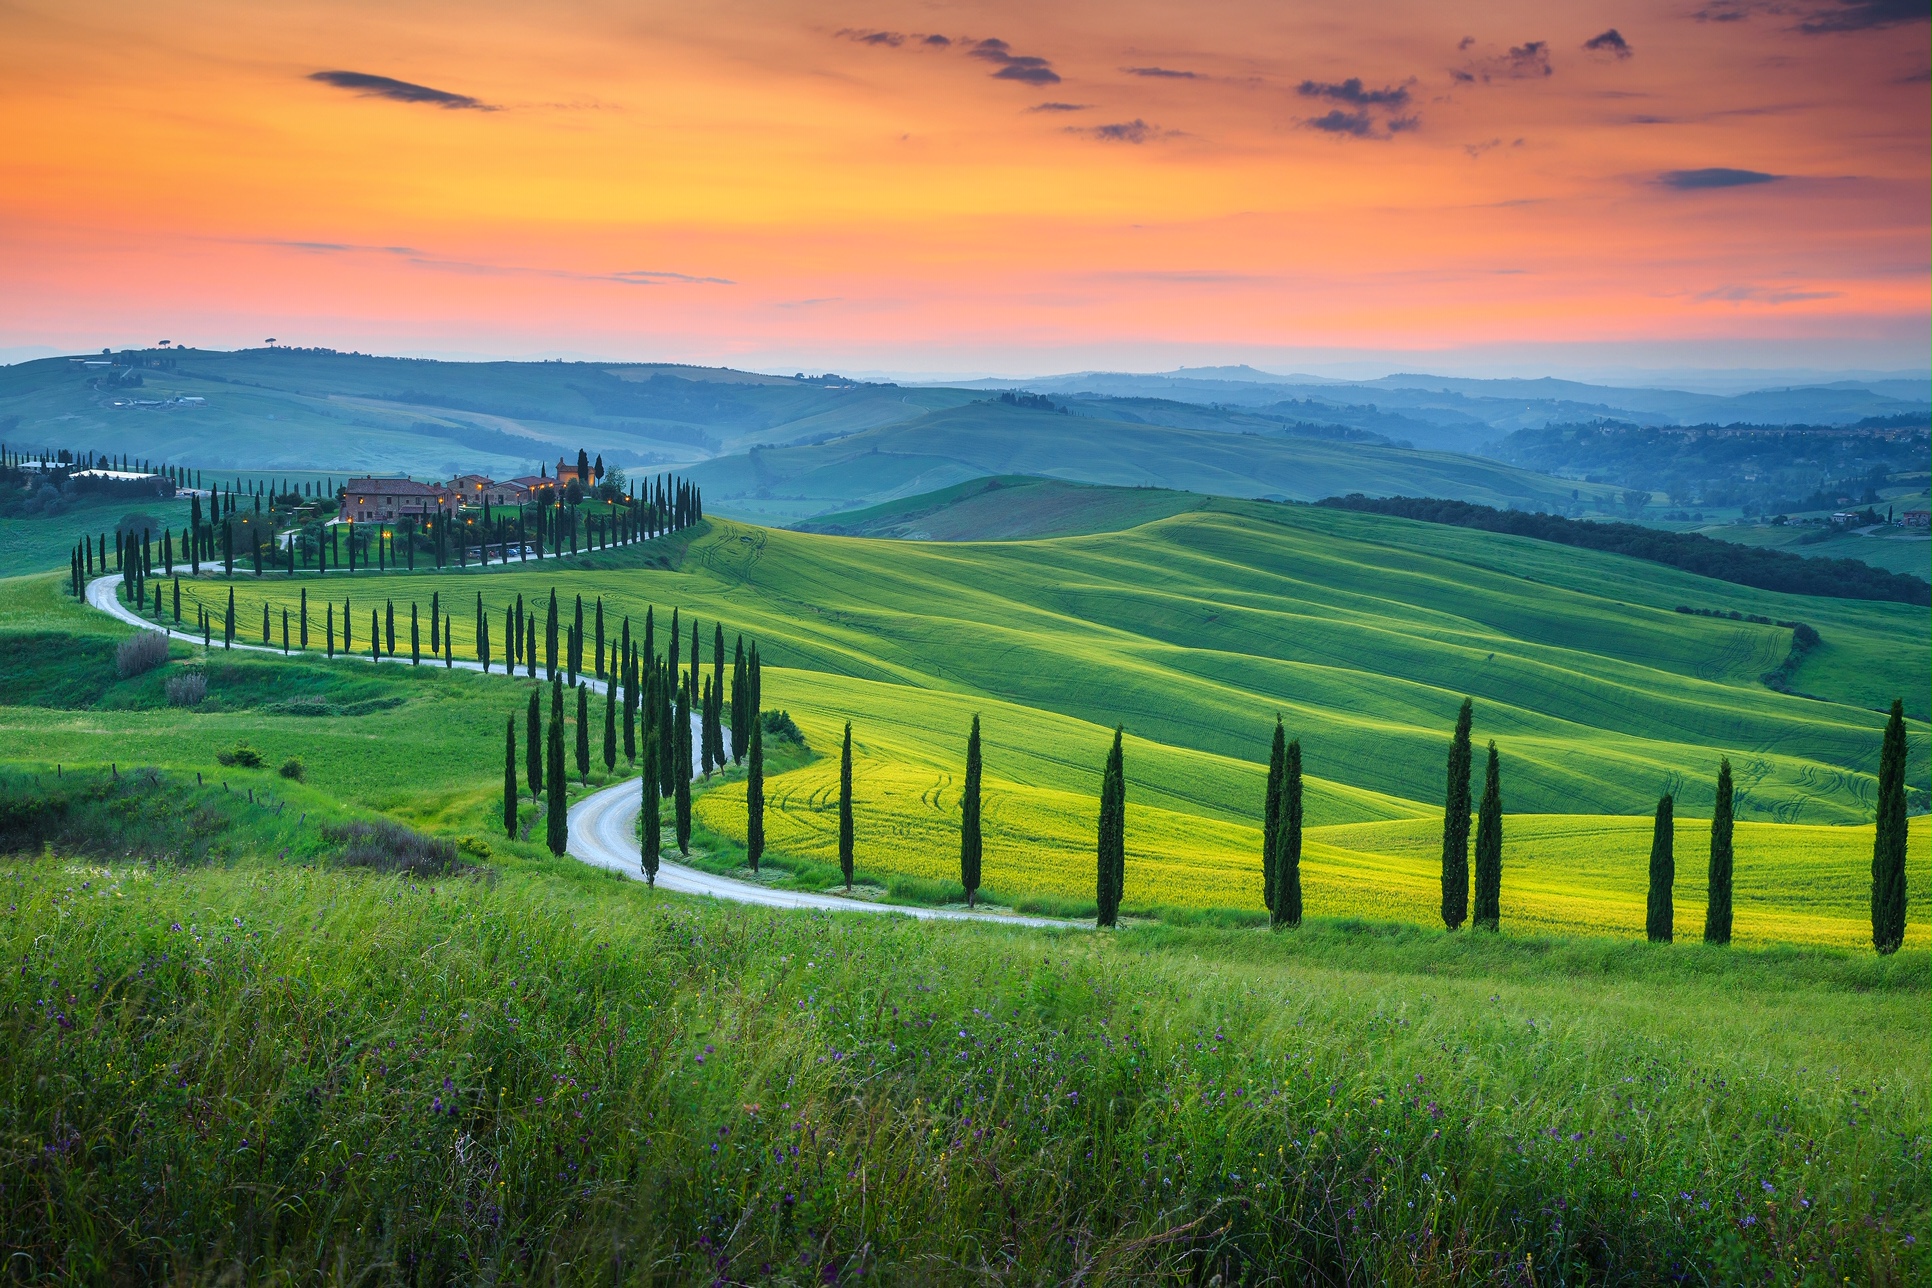 LTL Tours guarantees that your holiday in Italy will be a unique and enchanting experience